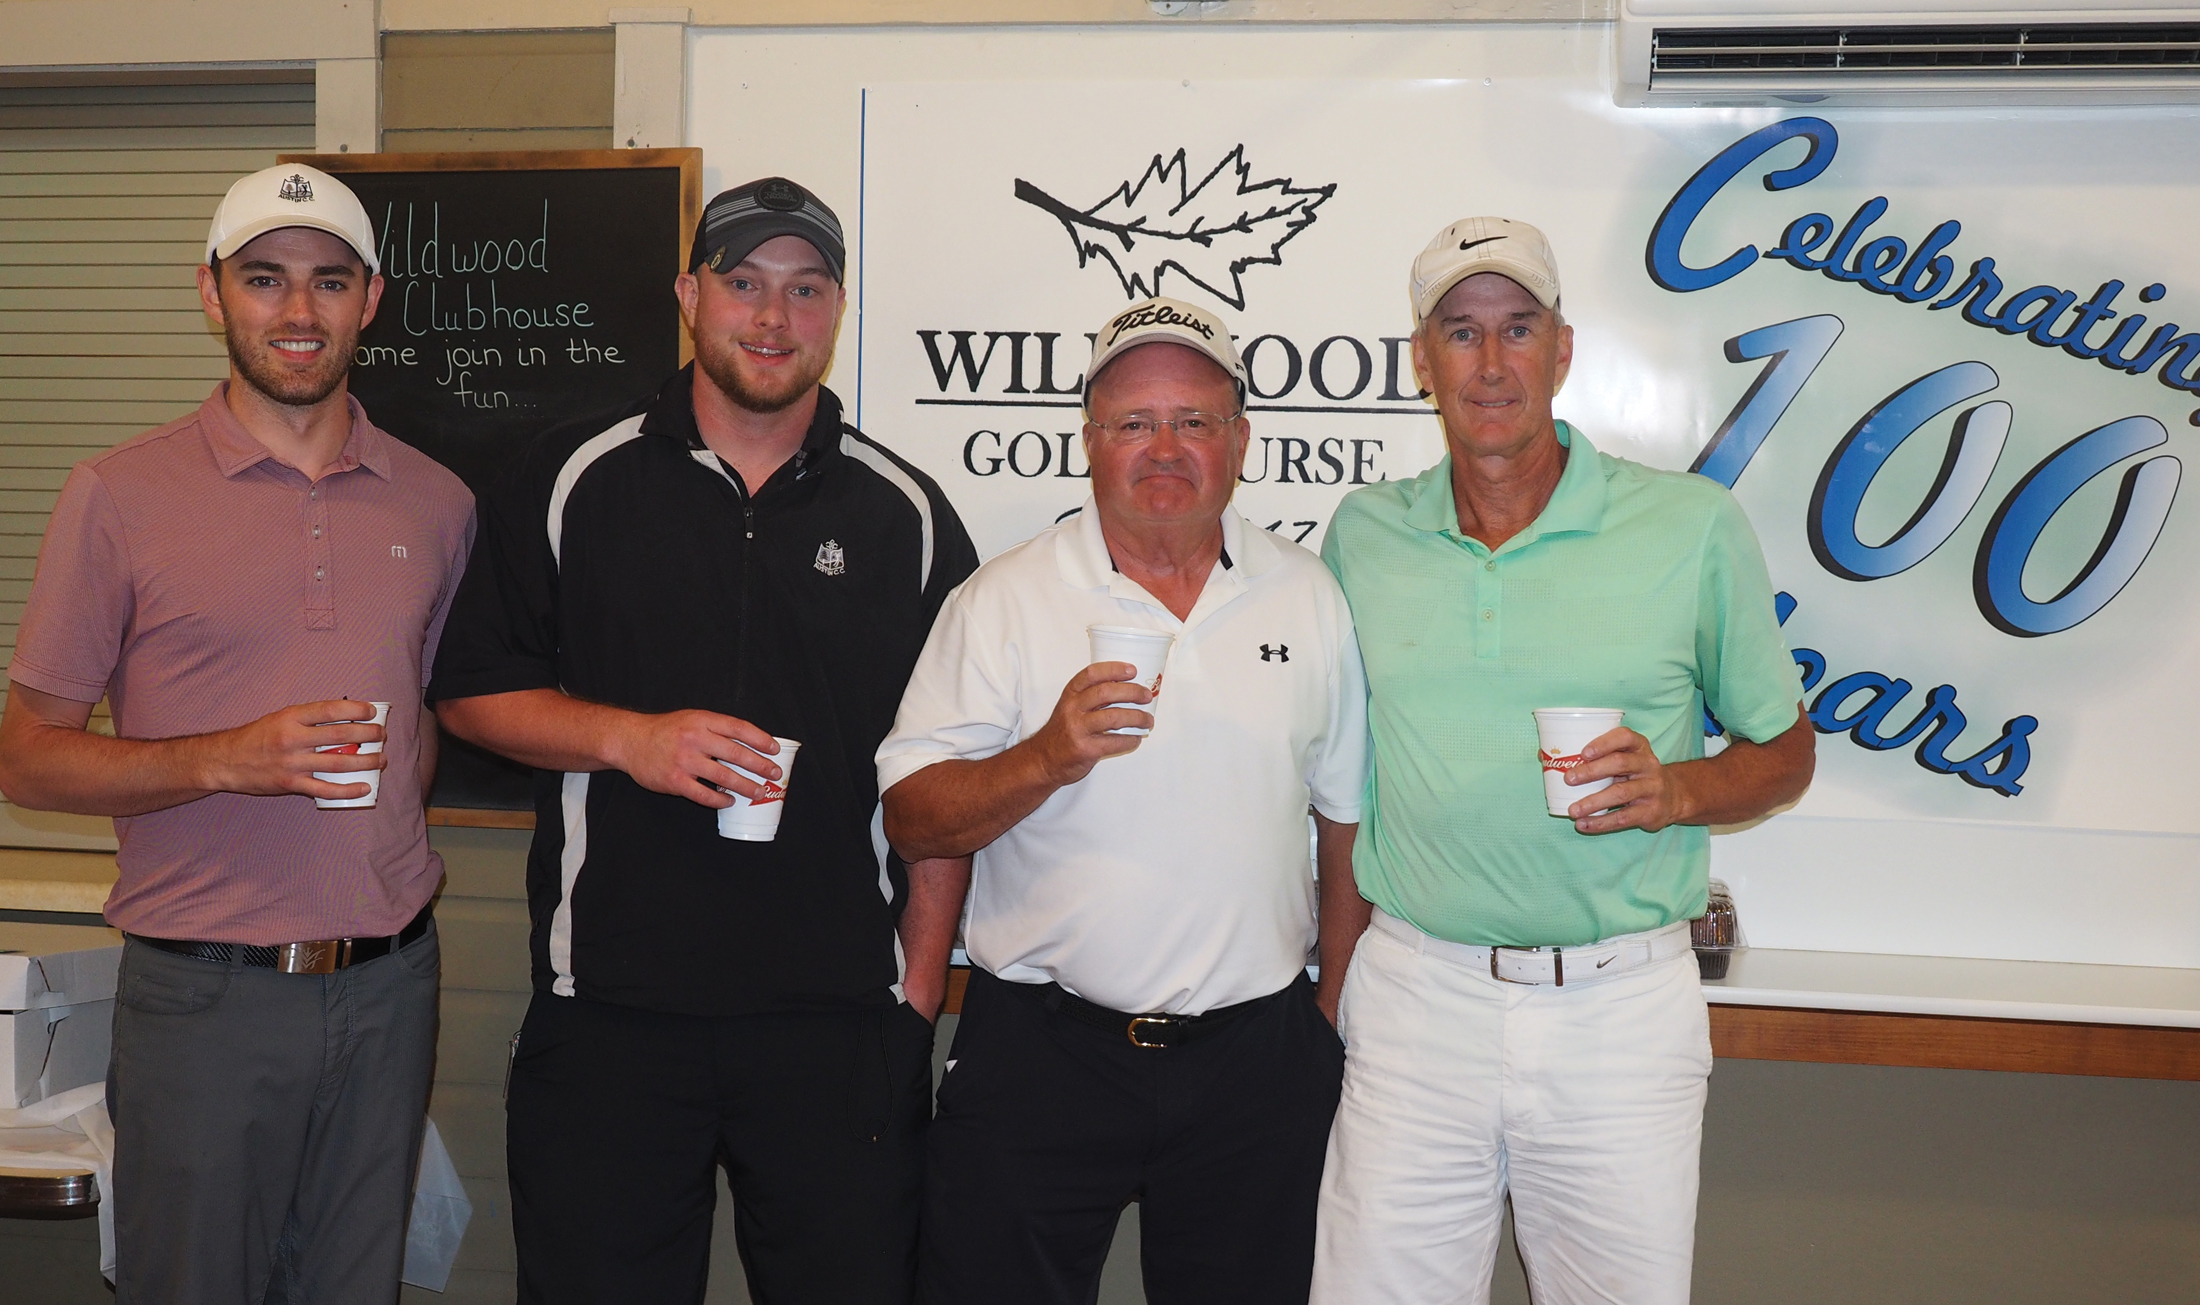 Wildwood celebrates centennial with golf outing